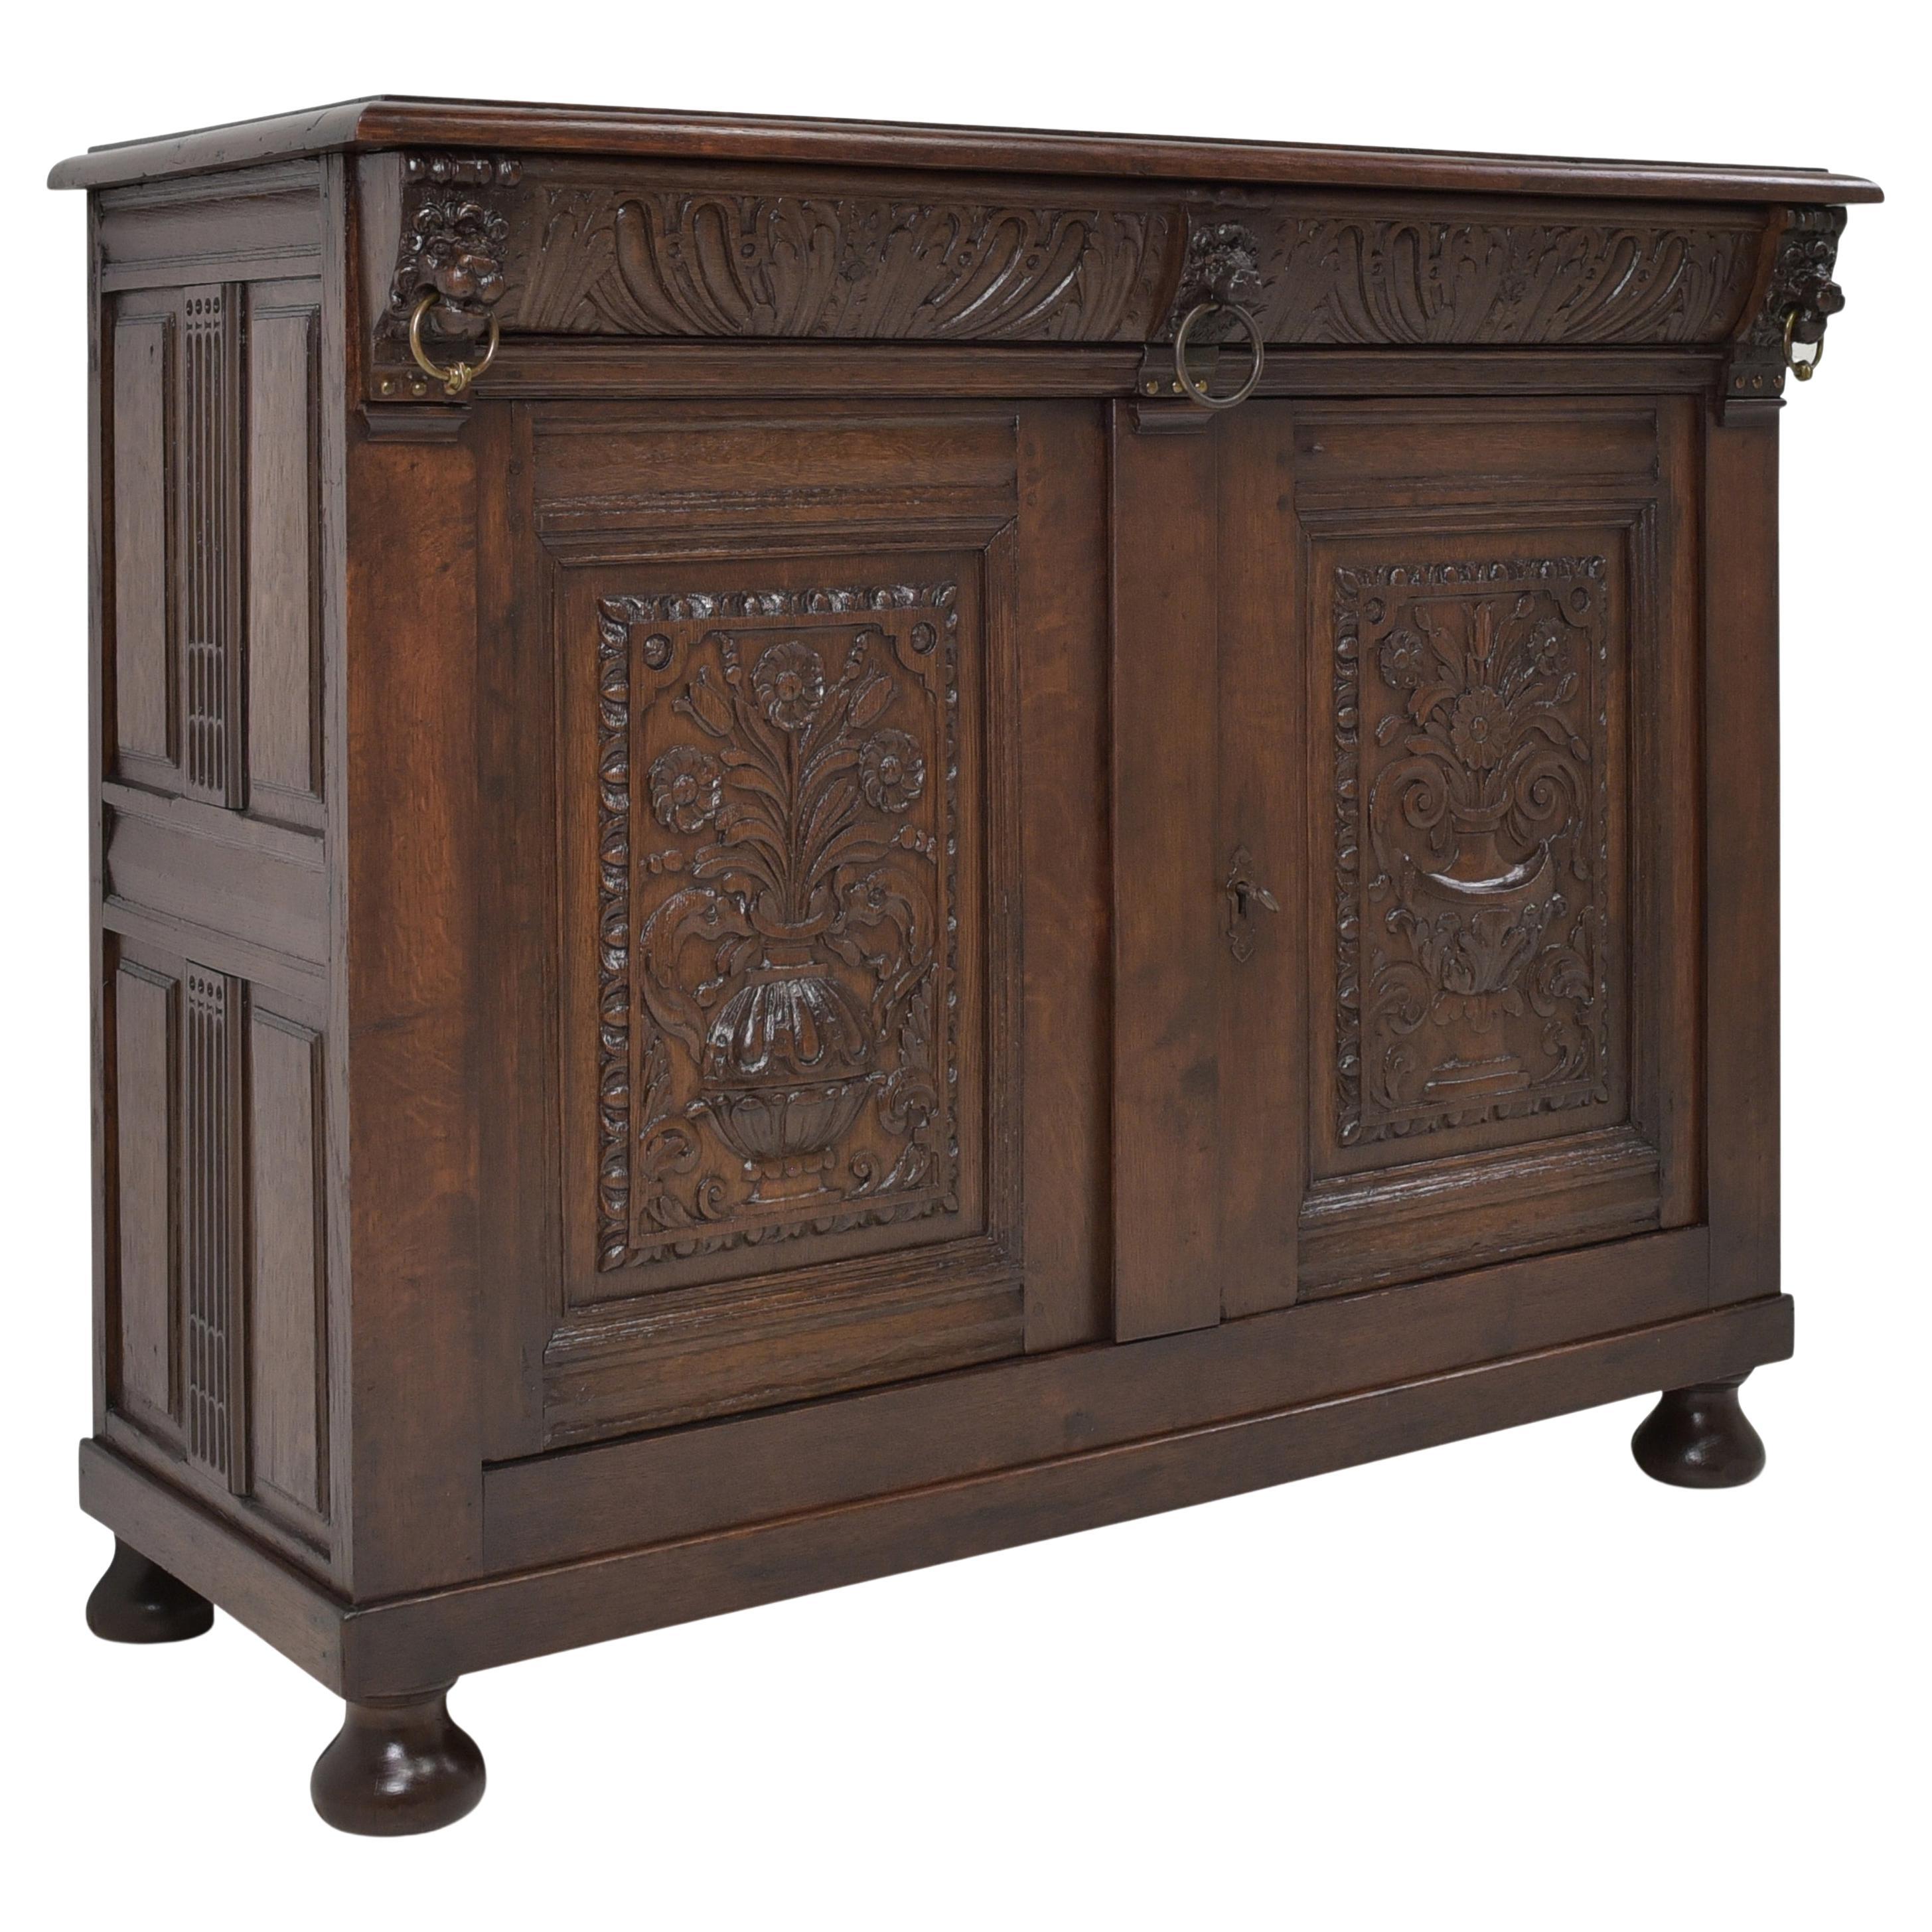 Renaissance Baroque Sideboard / Chest of Drawers / Cabinet in Oak, 1750